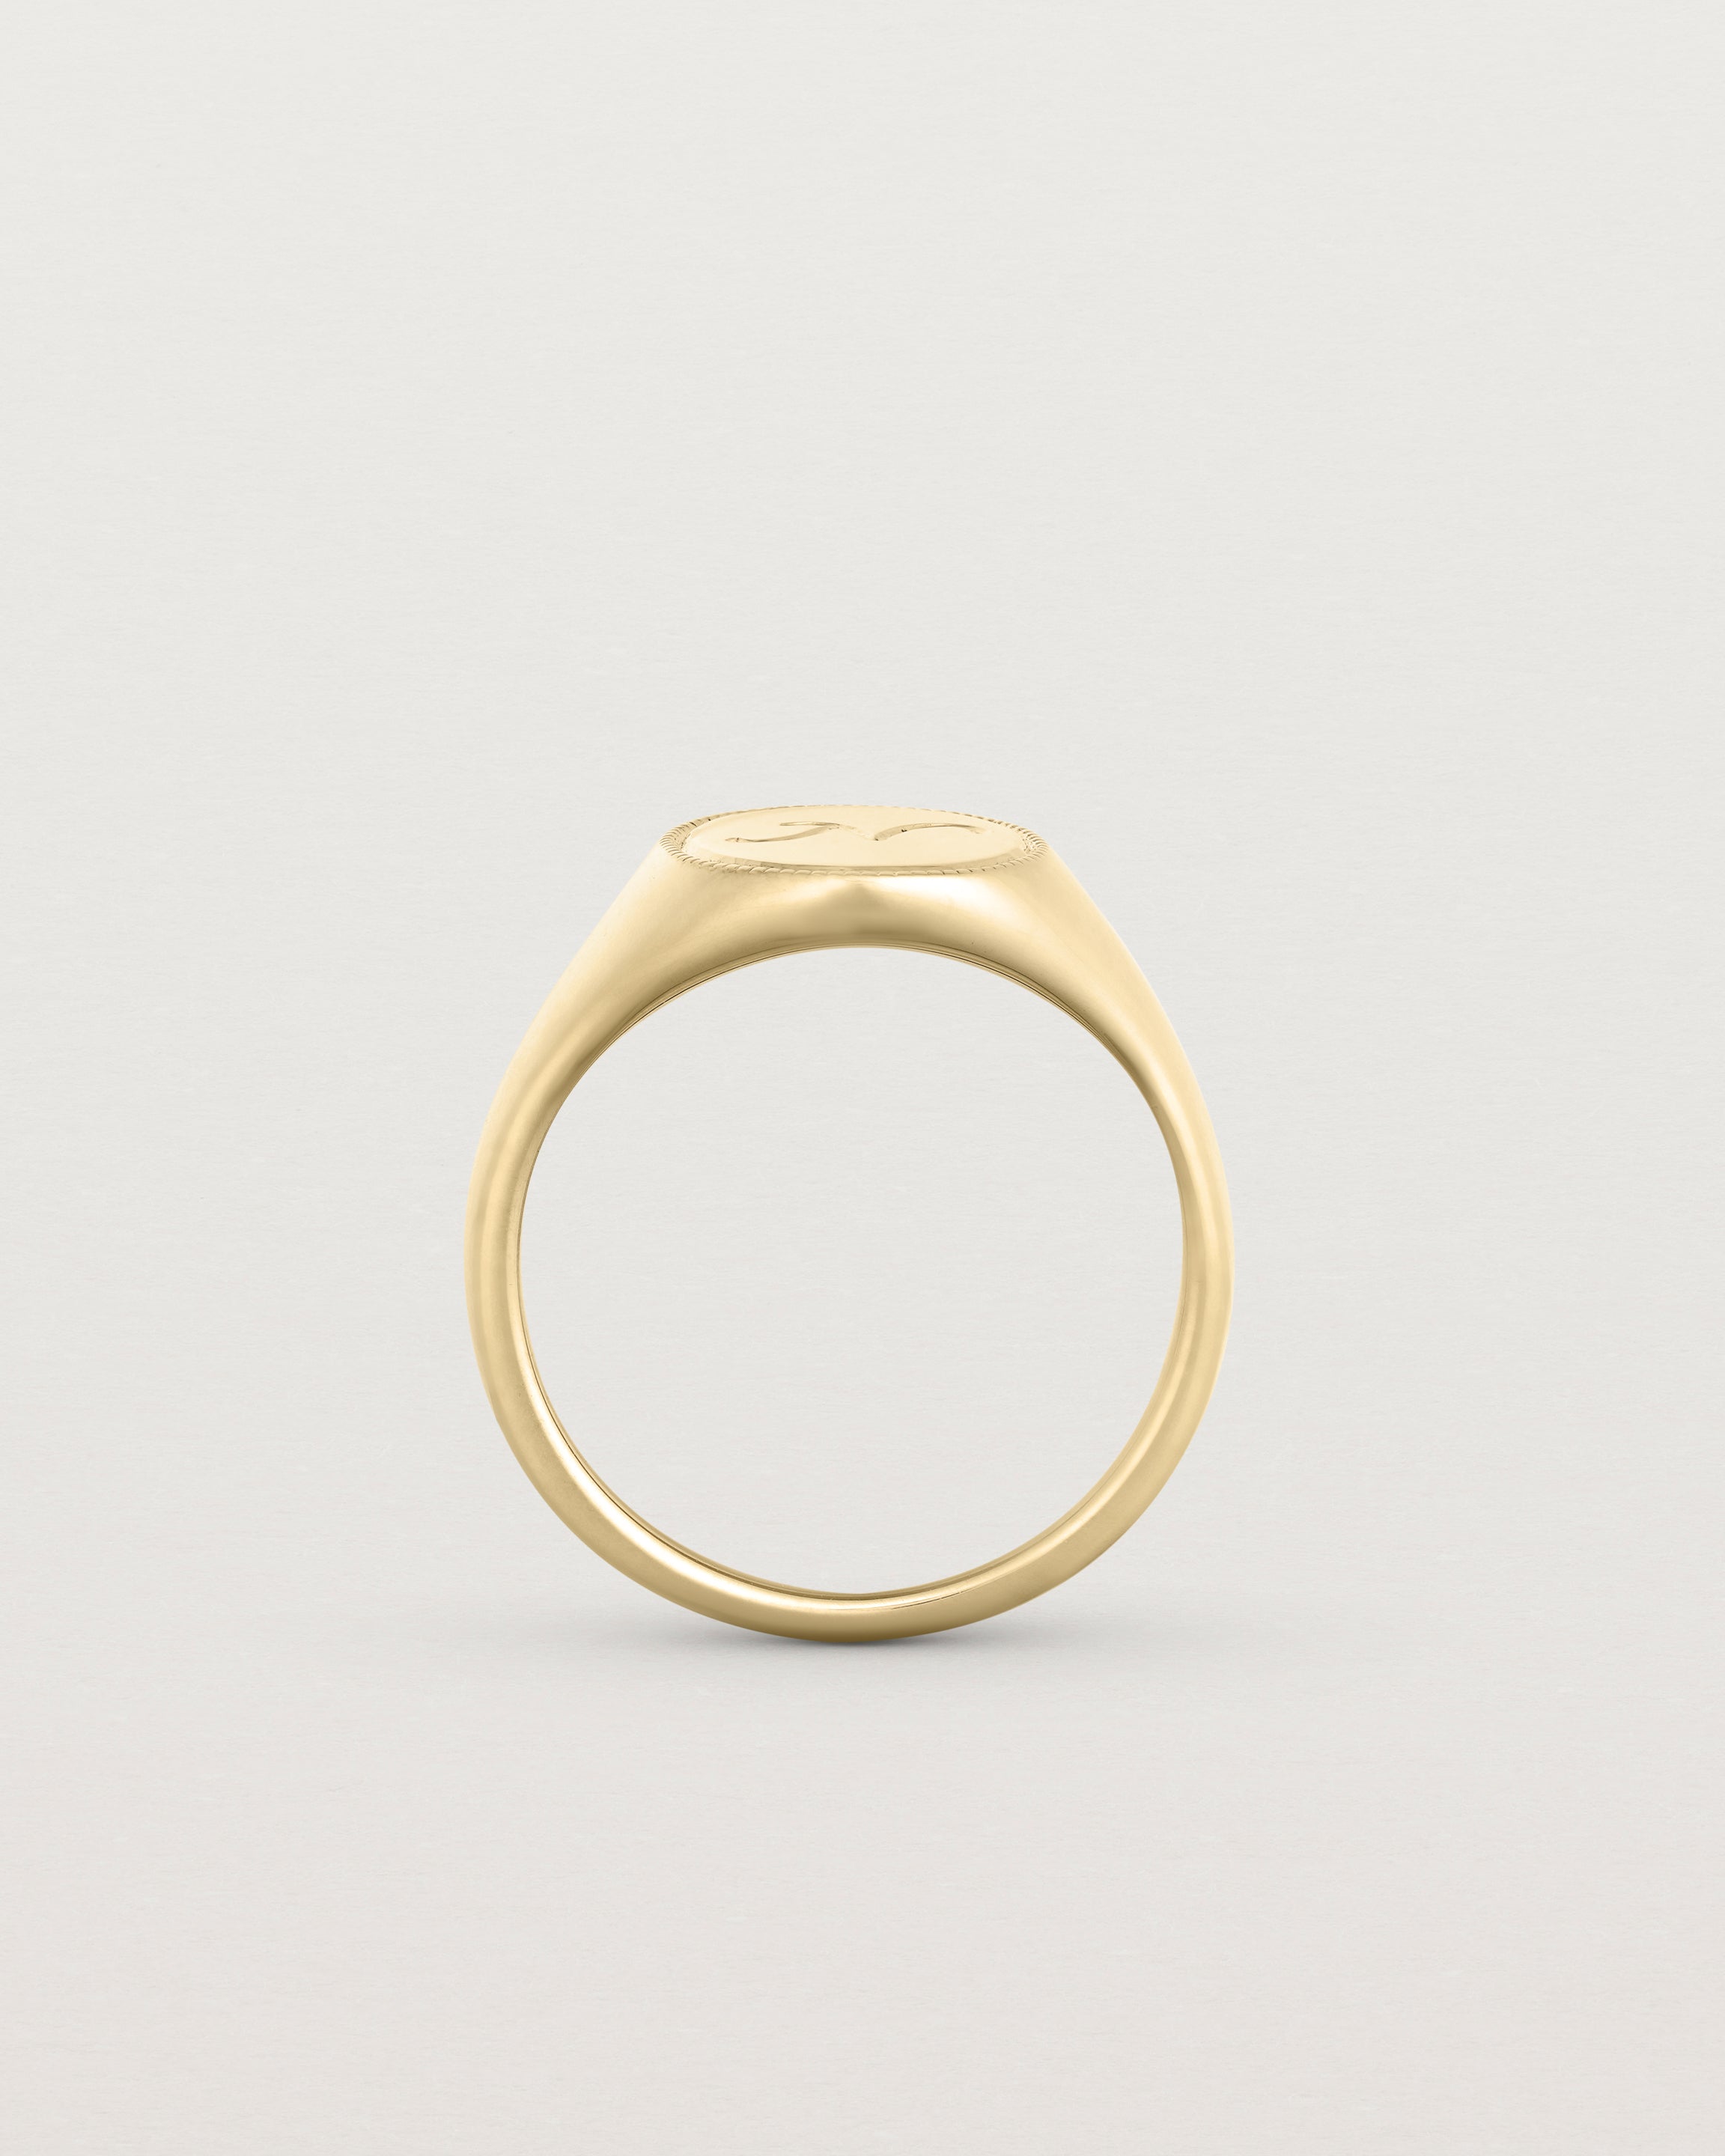 Standing view of the Arden Signet Ring | Millgrain in yellow gold.